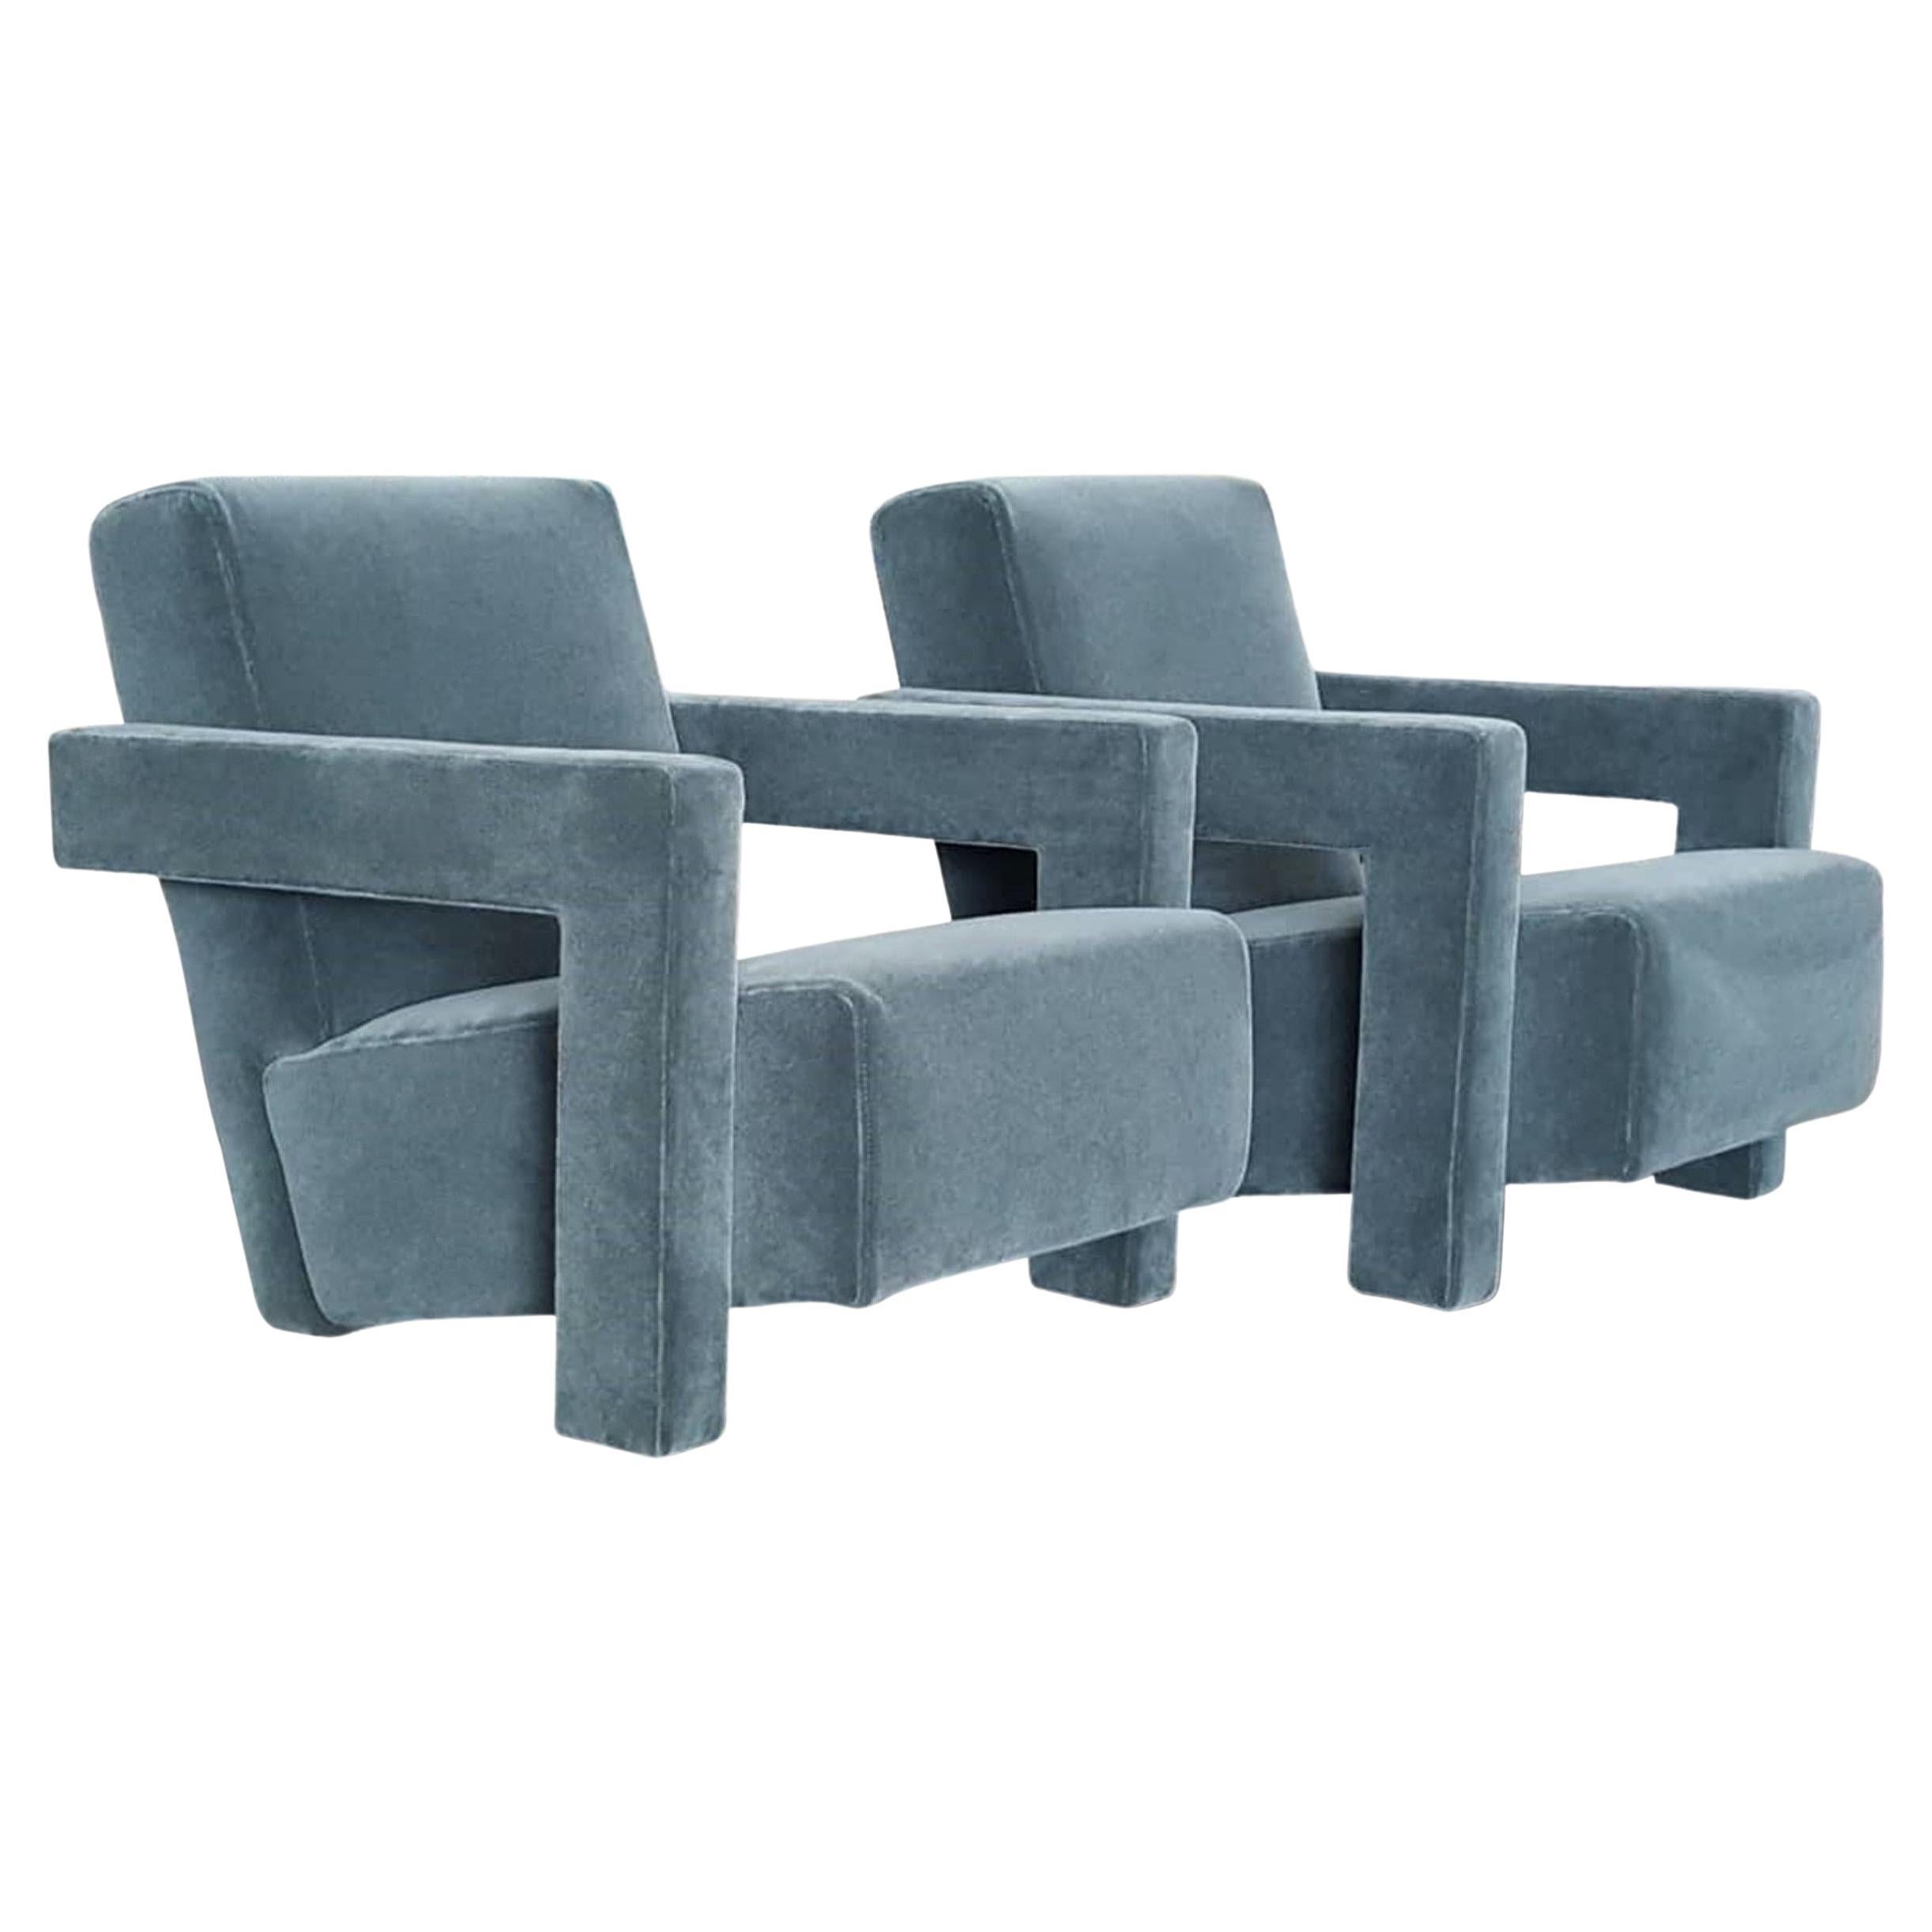 Pair 637 Utrecht Armchairs in a Dust Blue Mohair by Rietveld for Cassina